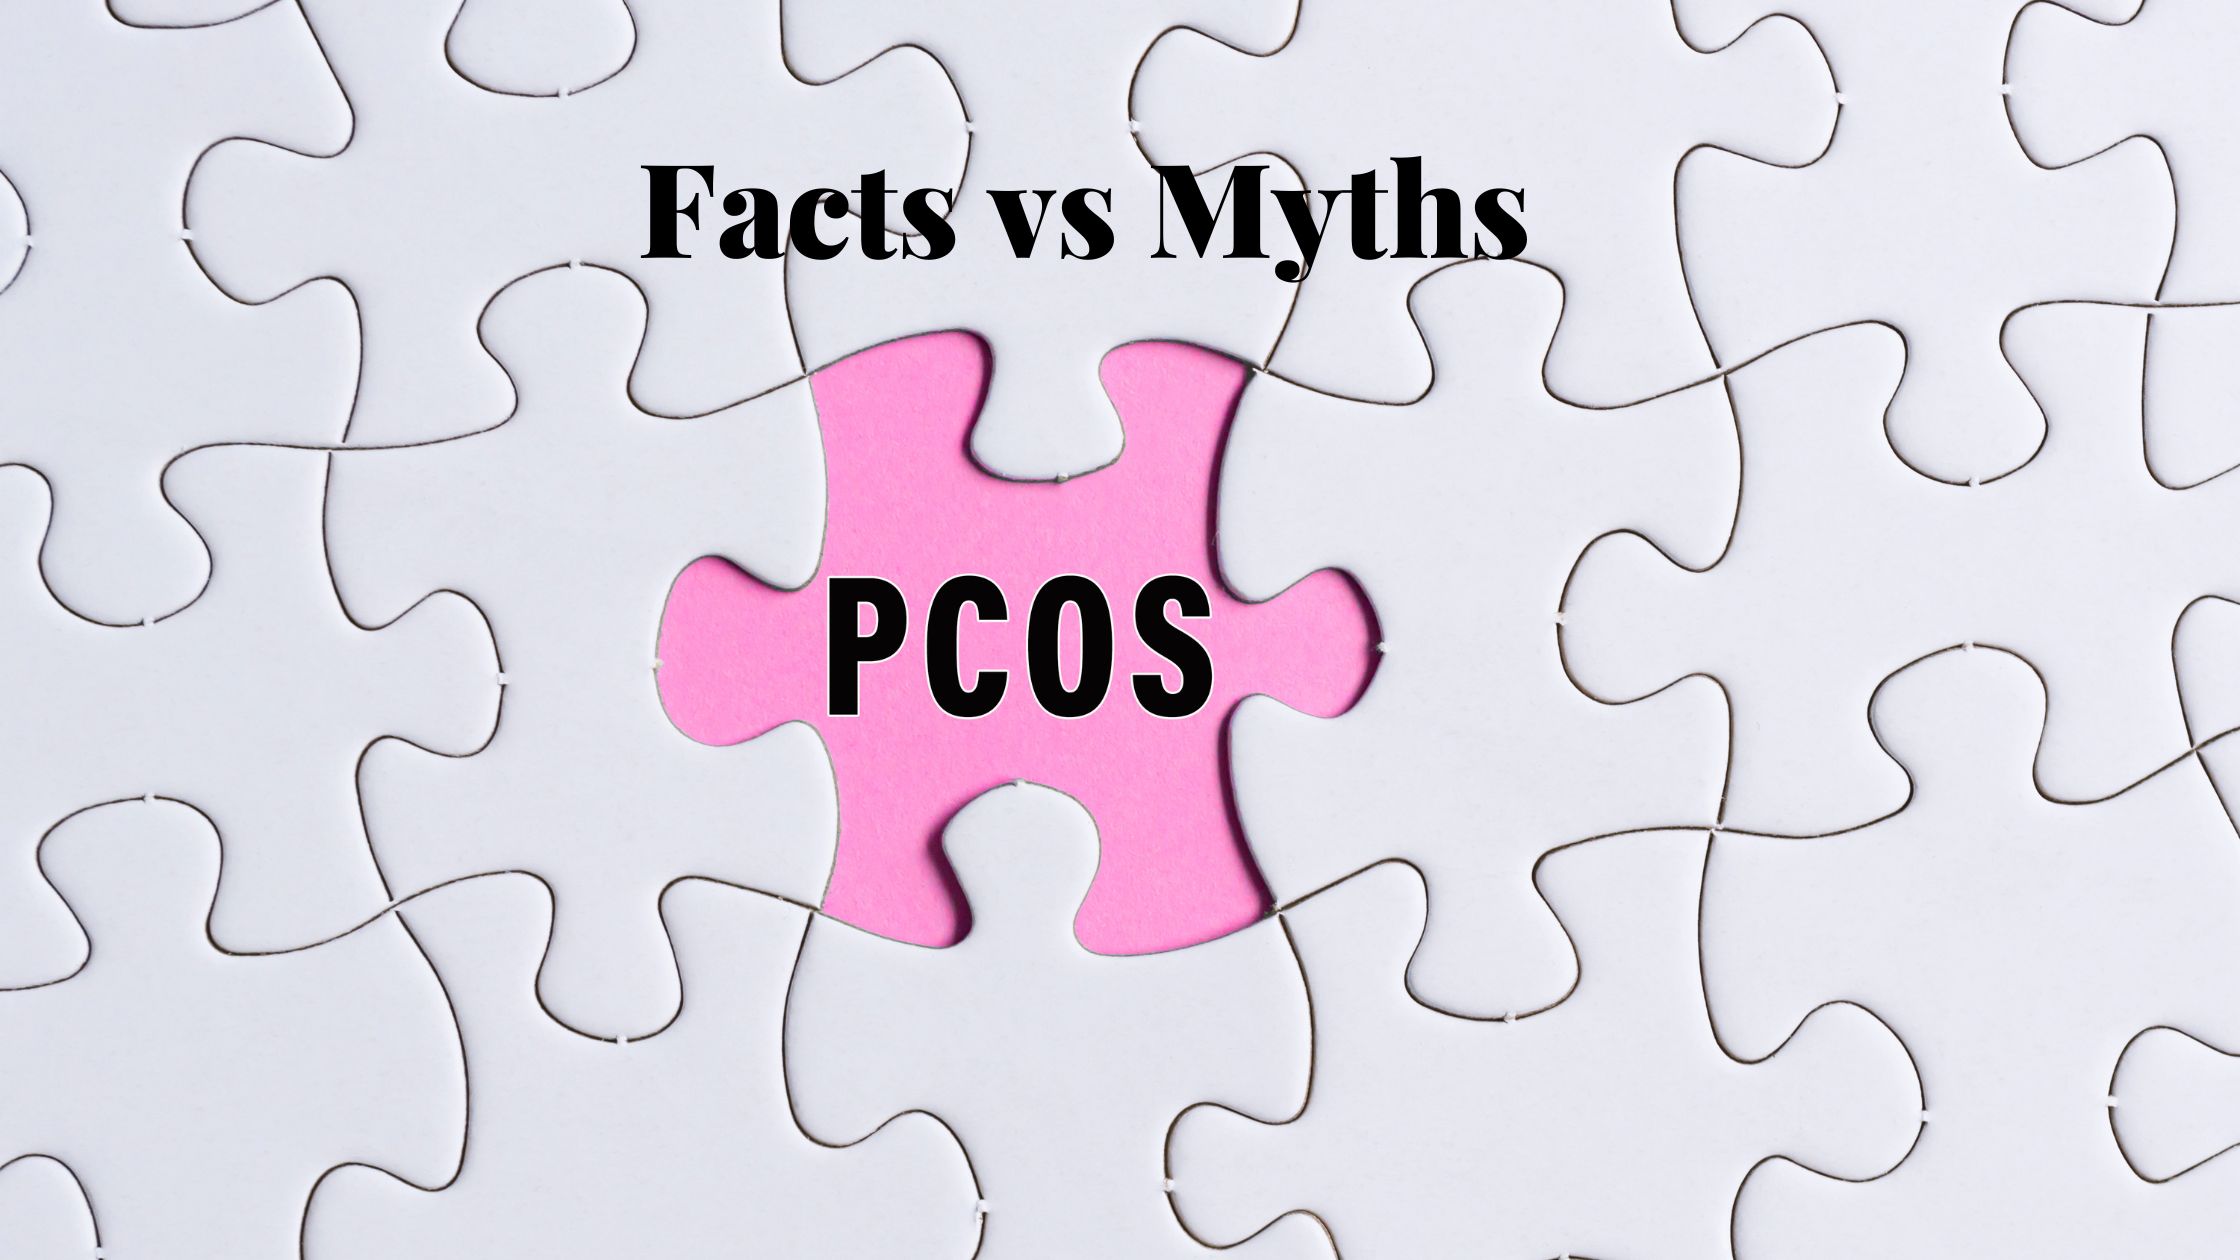 PCOS Facts vs Myths